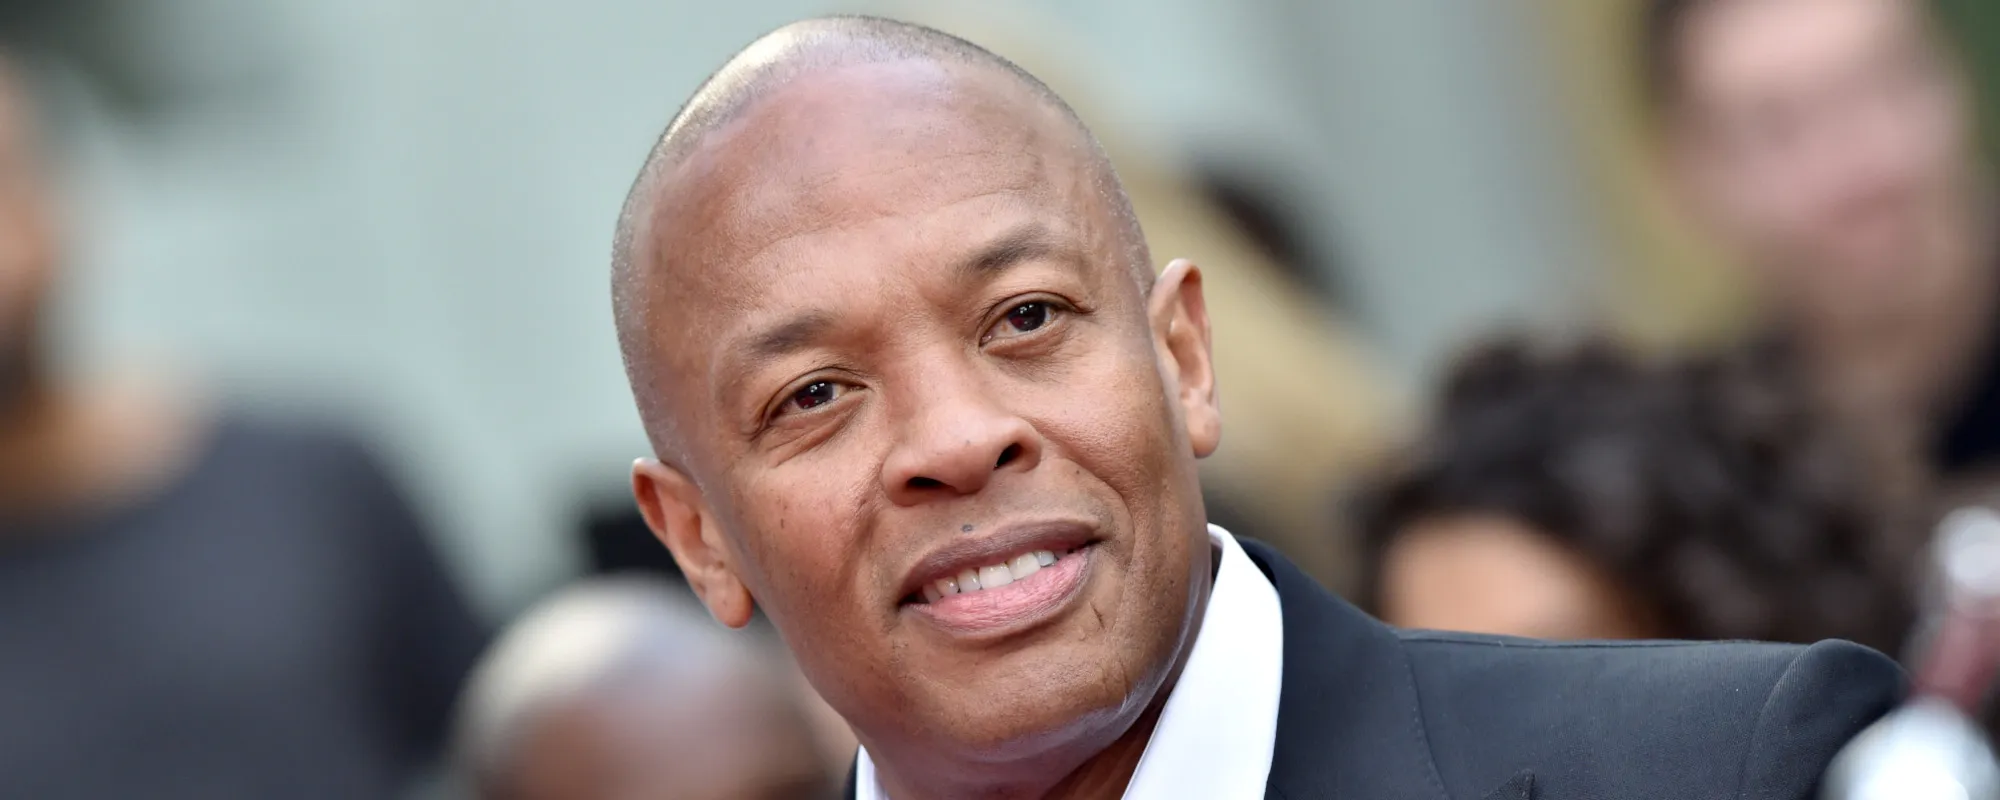 Dr. Dre Hints at New Songs: “I Did 247 Songs During the Pandemic”